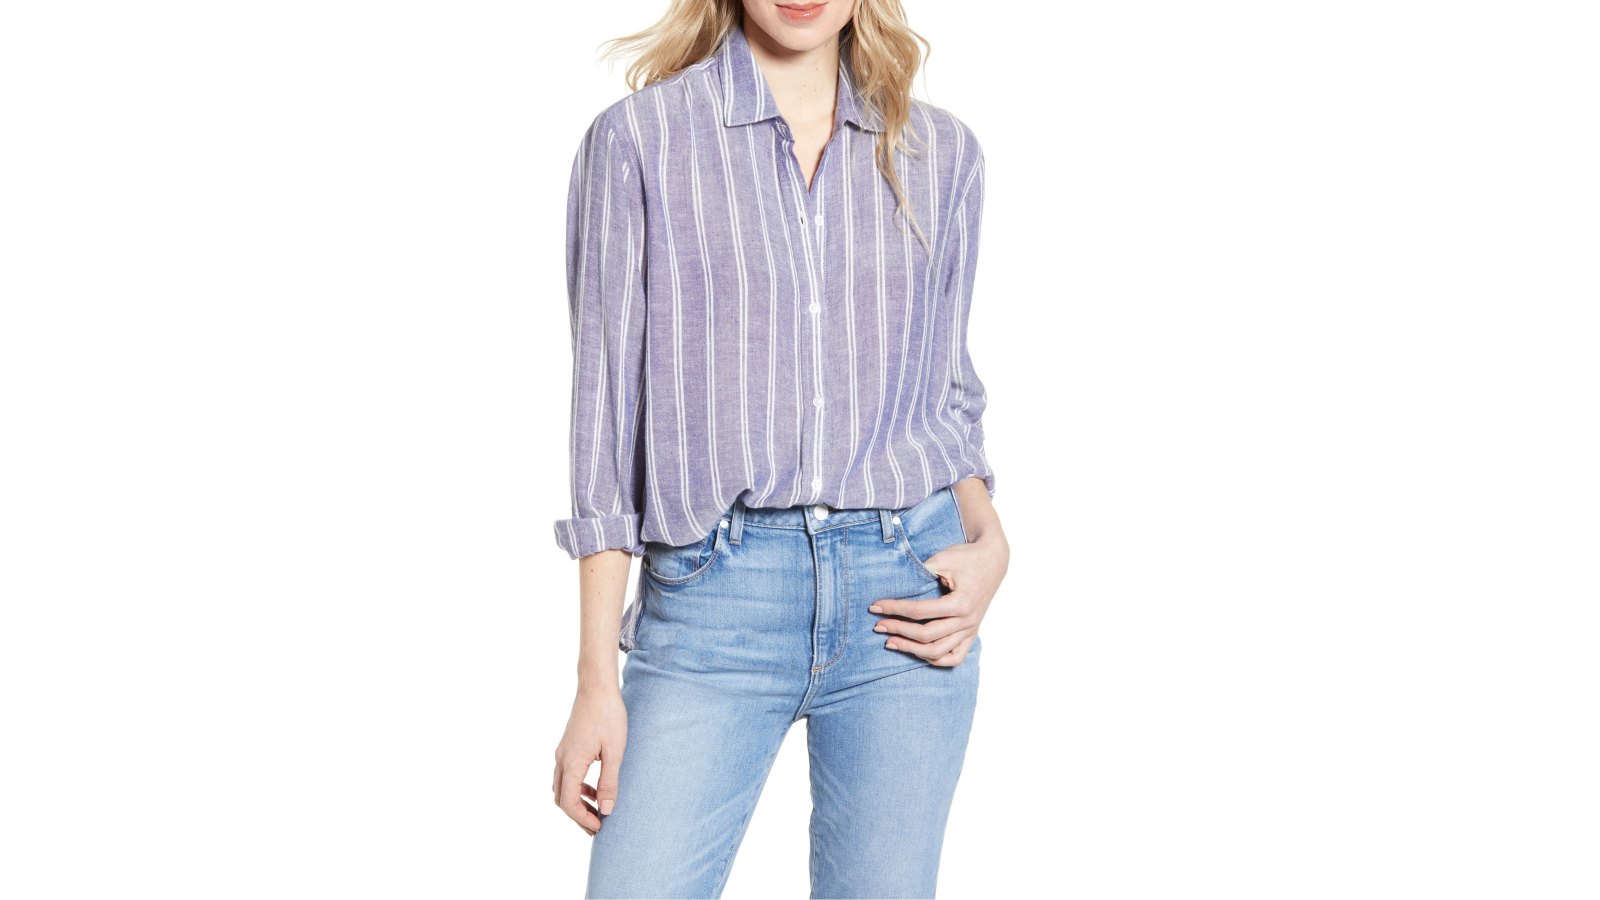 This Simple Shirt Is Perfect for Dressy But Easy Outfits